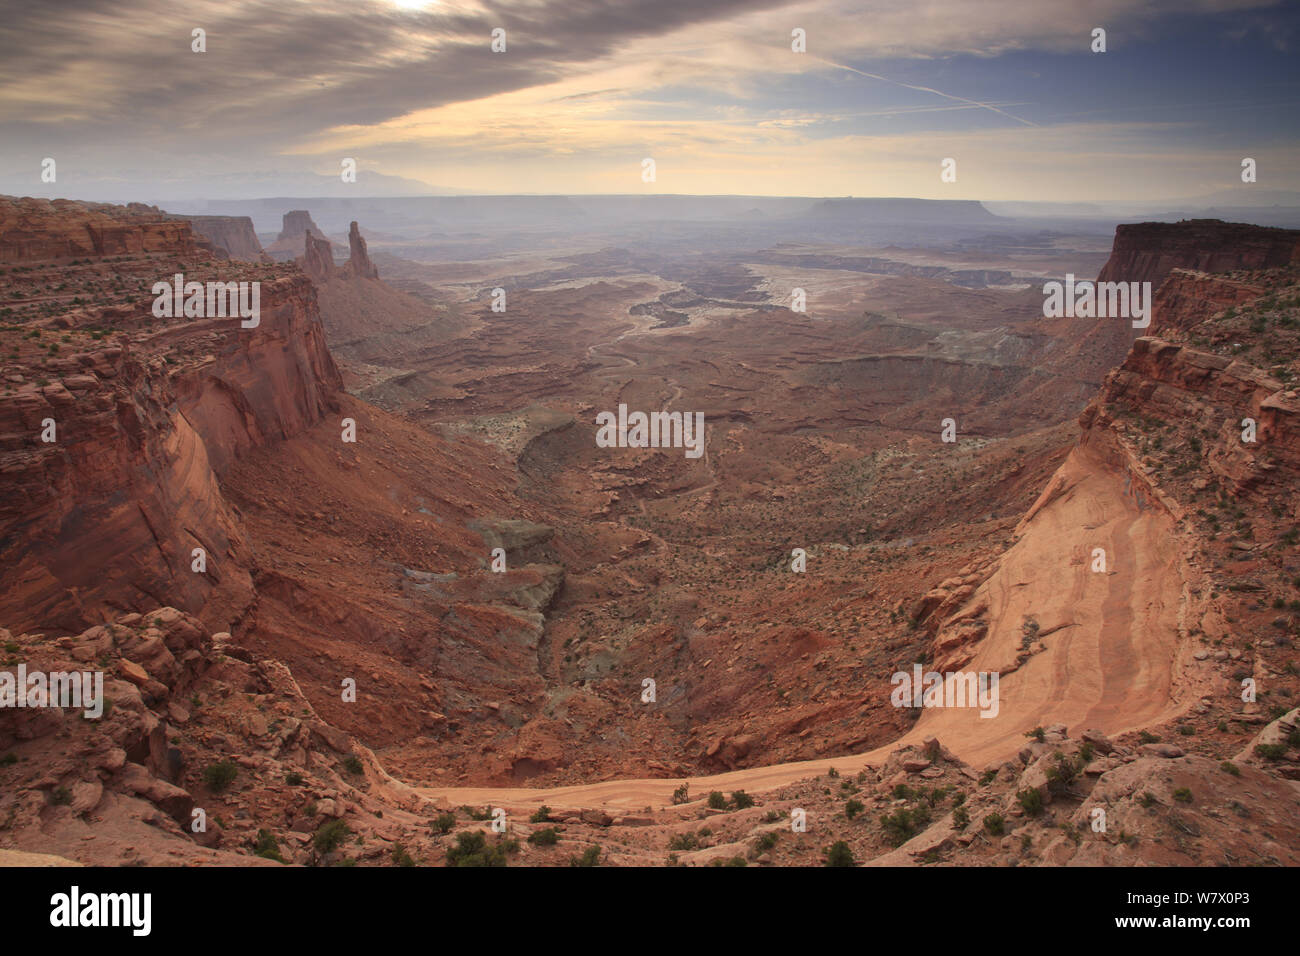 View from the curved edge of the plateau, Island in the Sky section, Canyonlands National Park, Utah, Colorado Plateau, April 2010. Stock Photo